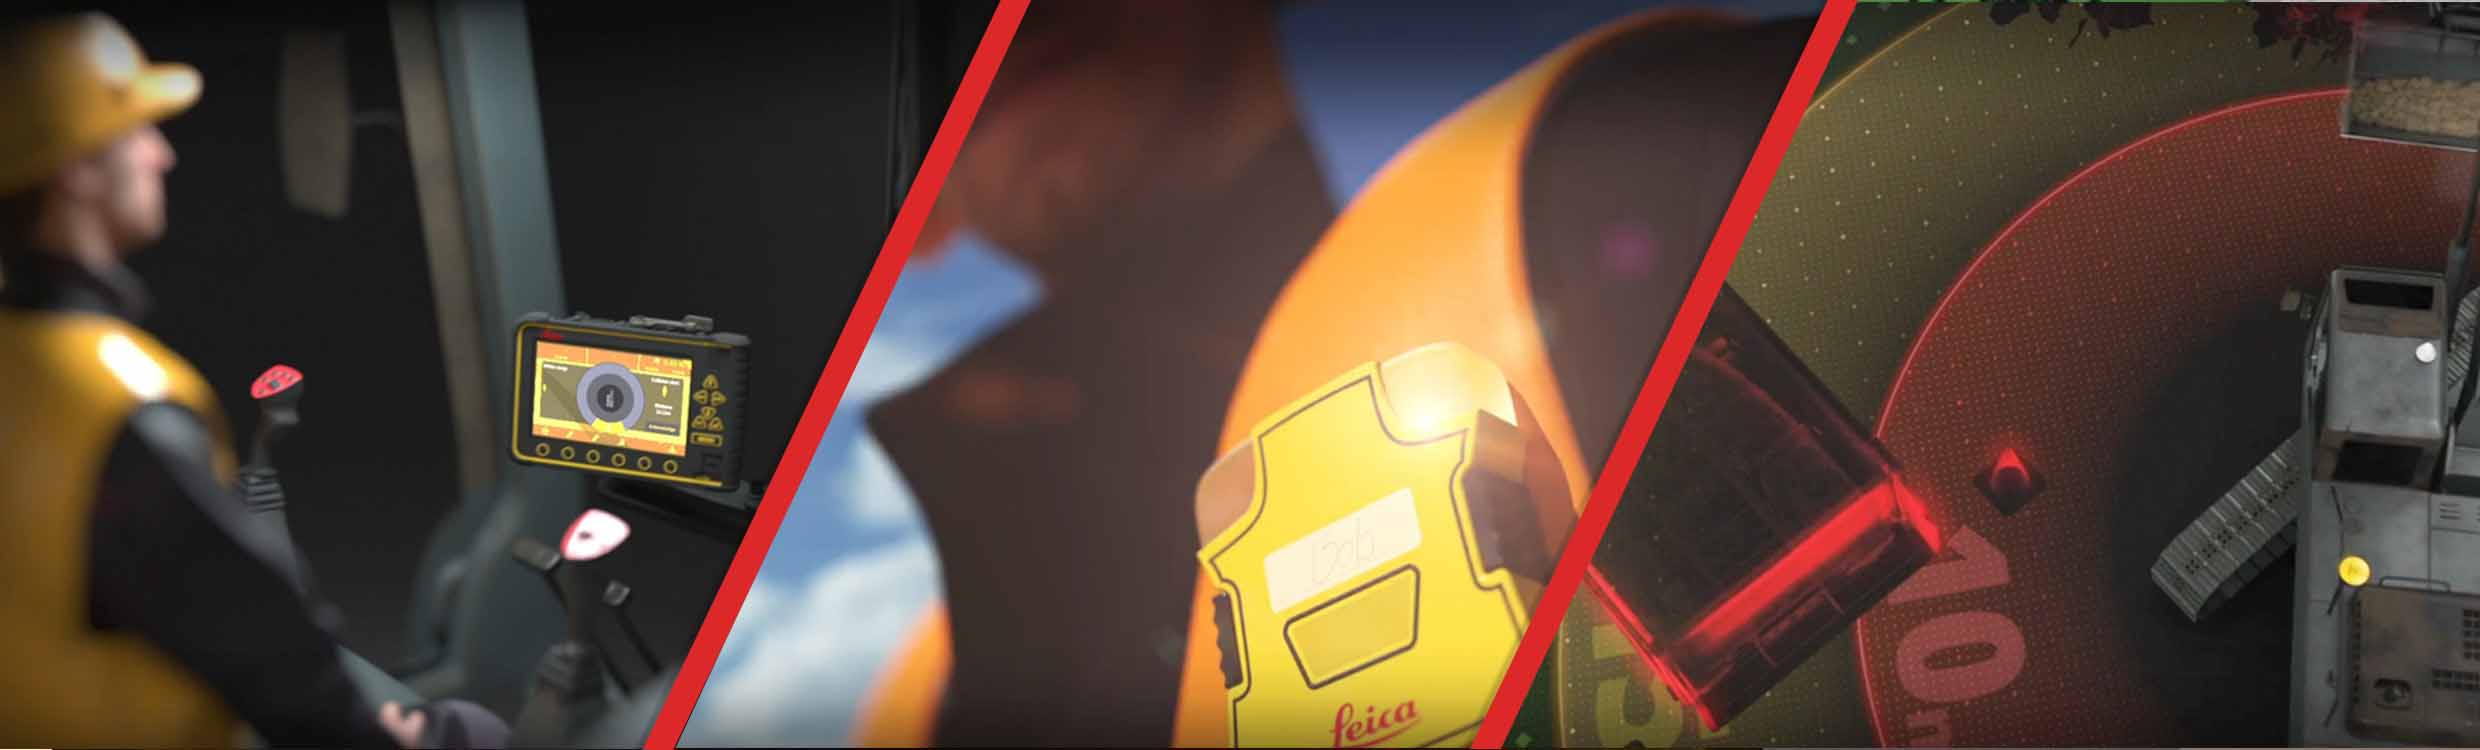 Leica Geosystems announces substantial safety awareness solution enhancements 